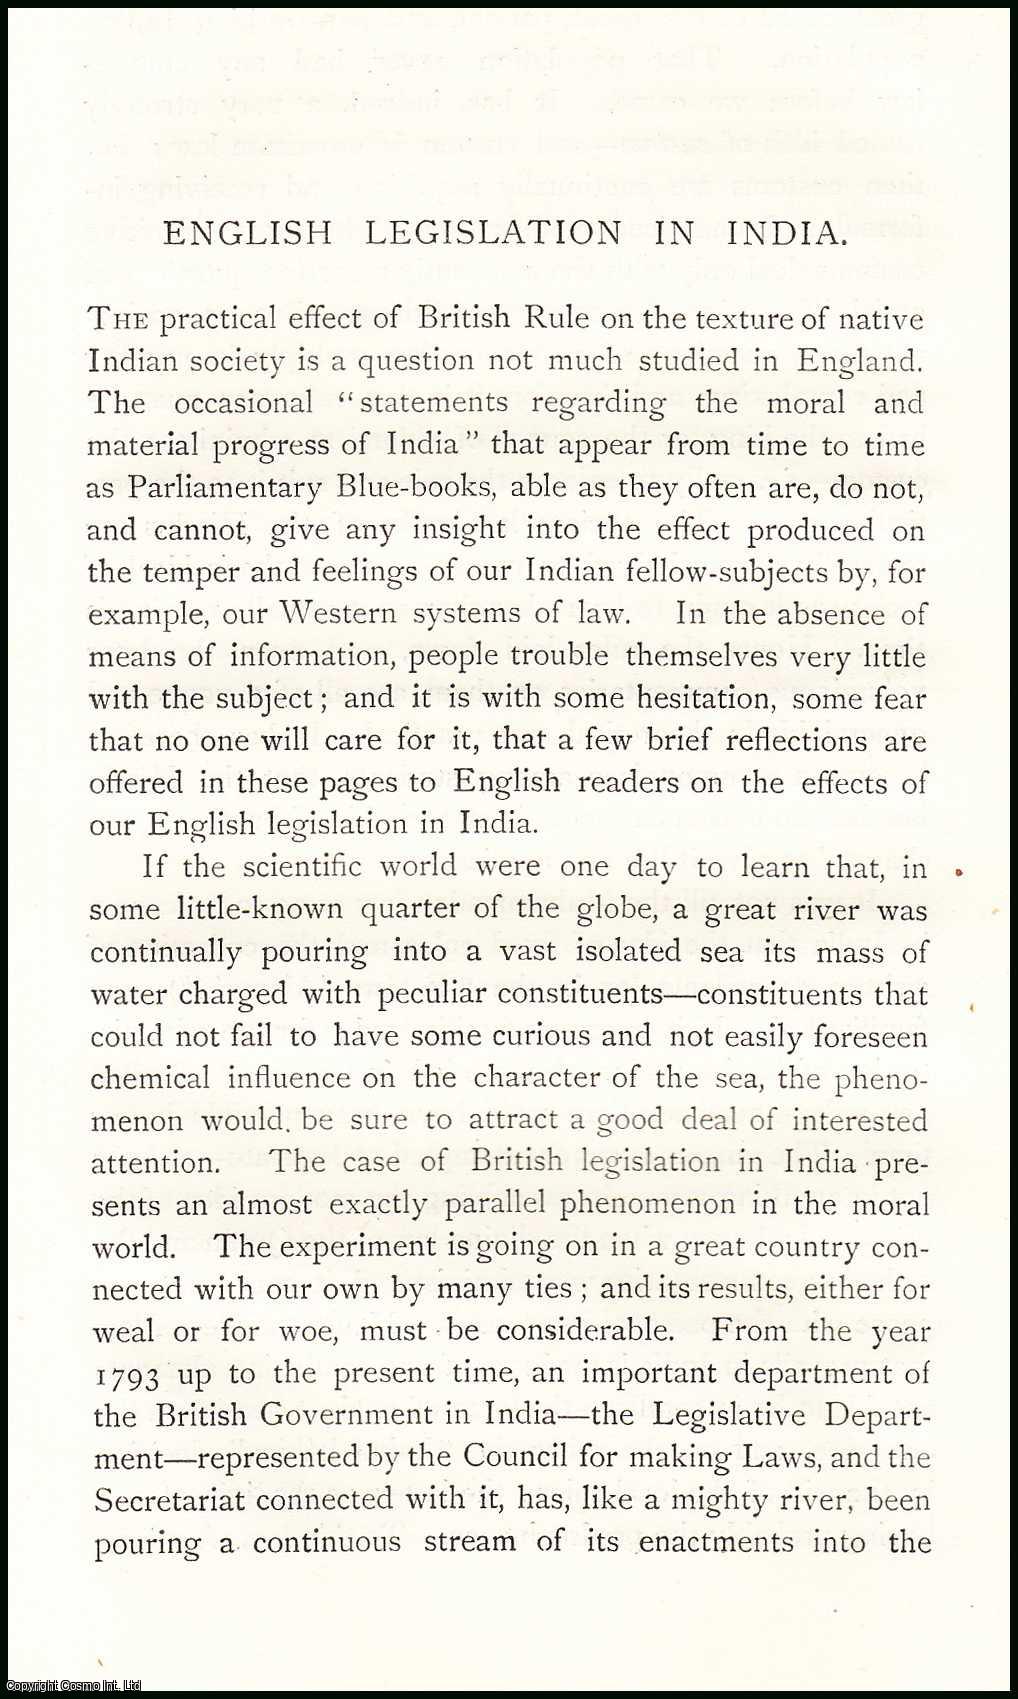 B.H. Baden-Powell - English Legislation in India. An uncommon original article from The Asiatic Quarterly Review, 1886.